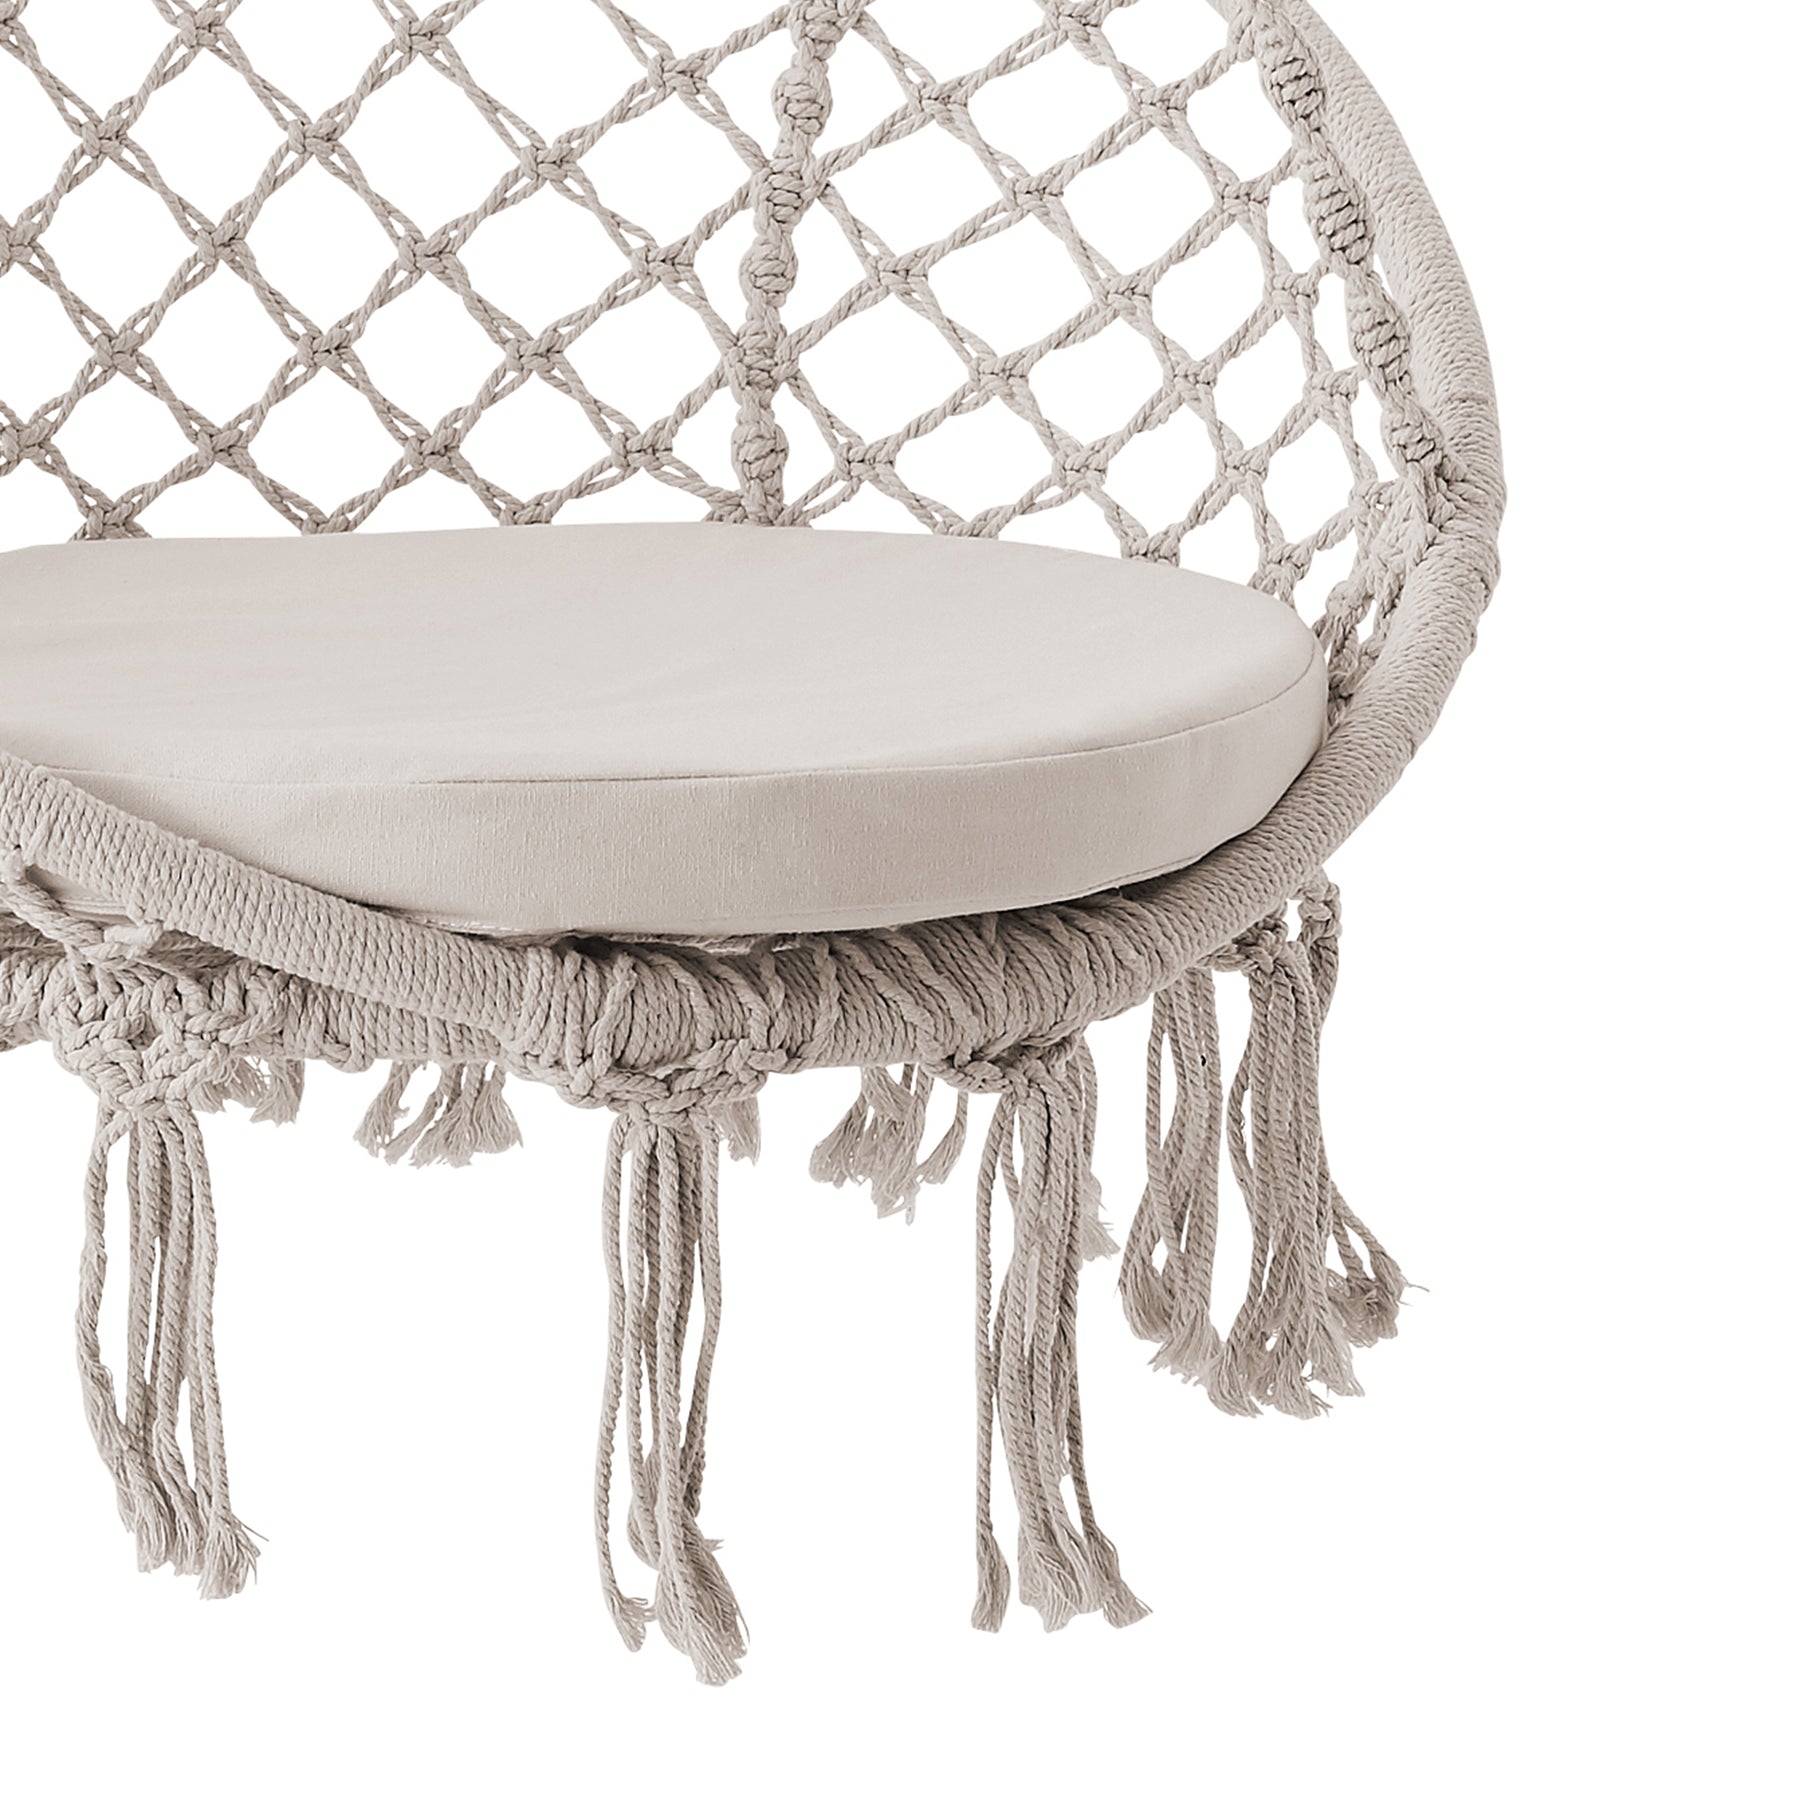 Close-up of the Bliss Hammocks 31.5-inch Wide Macramé Swing Chair with Fringe lining and Padded Cushion. showing the fringes on the bottom.